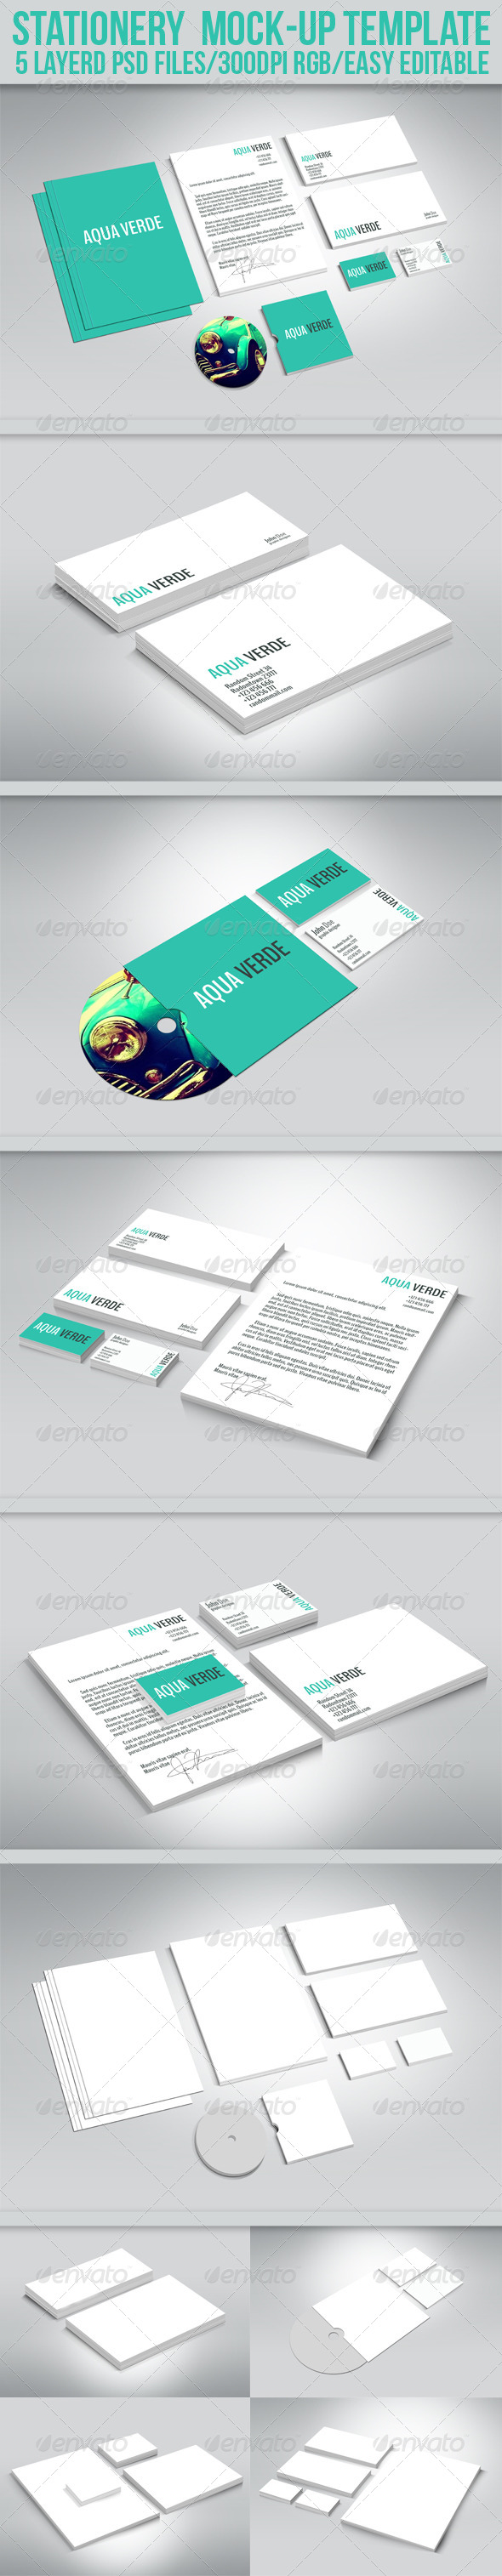 Clean Stationery Mockup Template